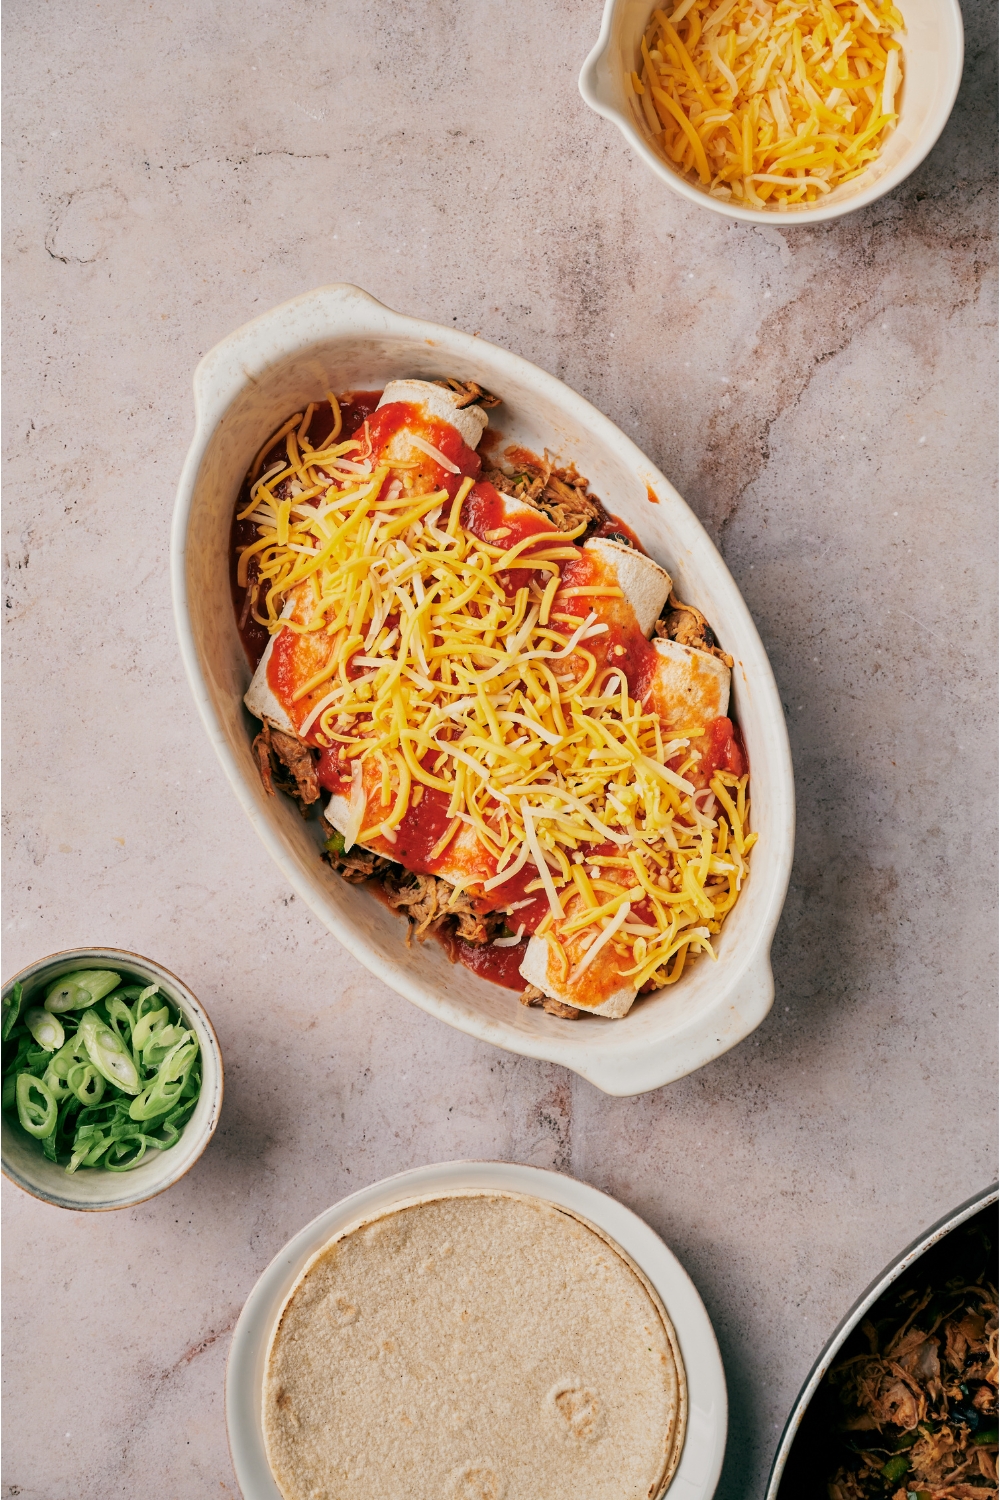 A baking dish filled with unbaked enchiladas covered in red sauce and shredded cheese.